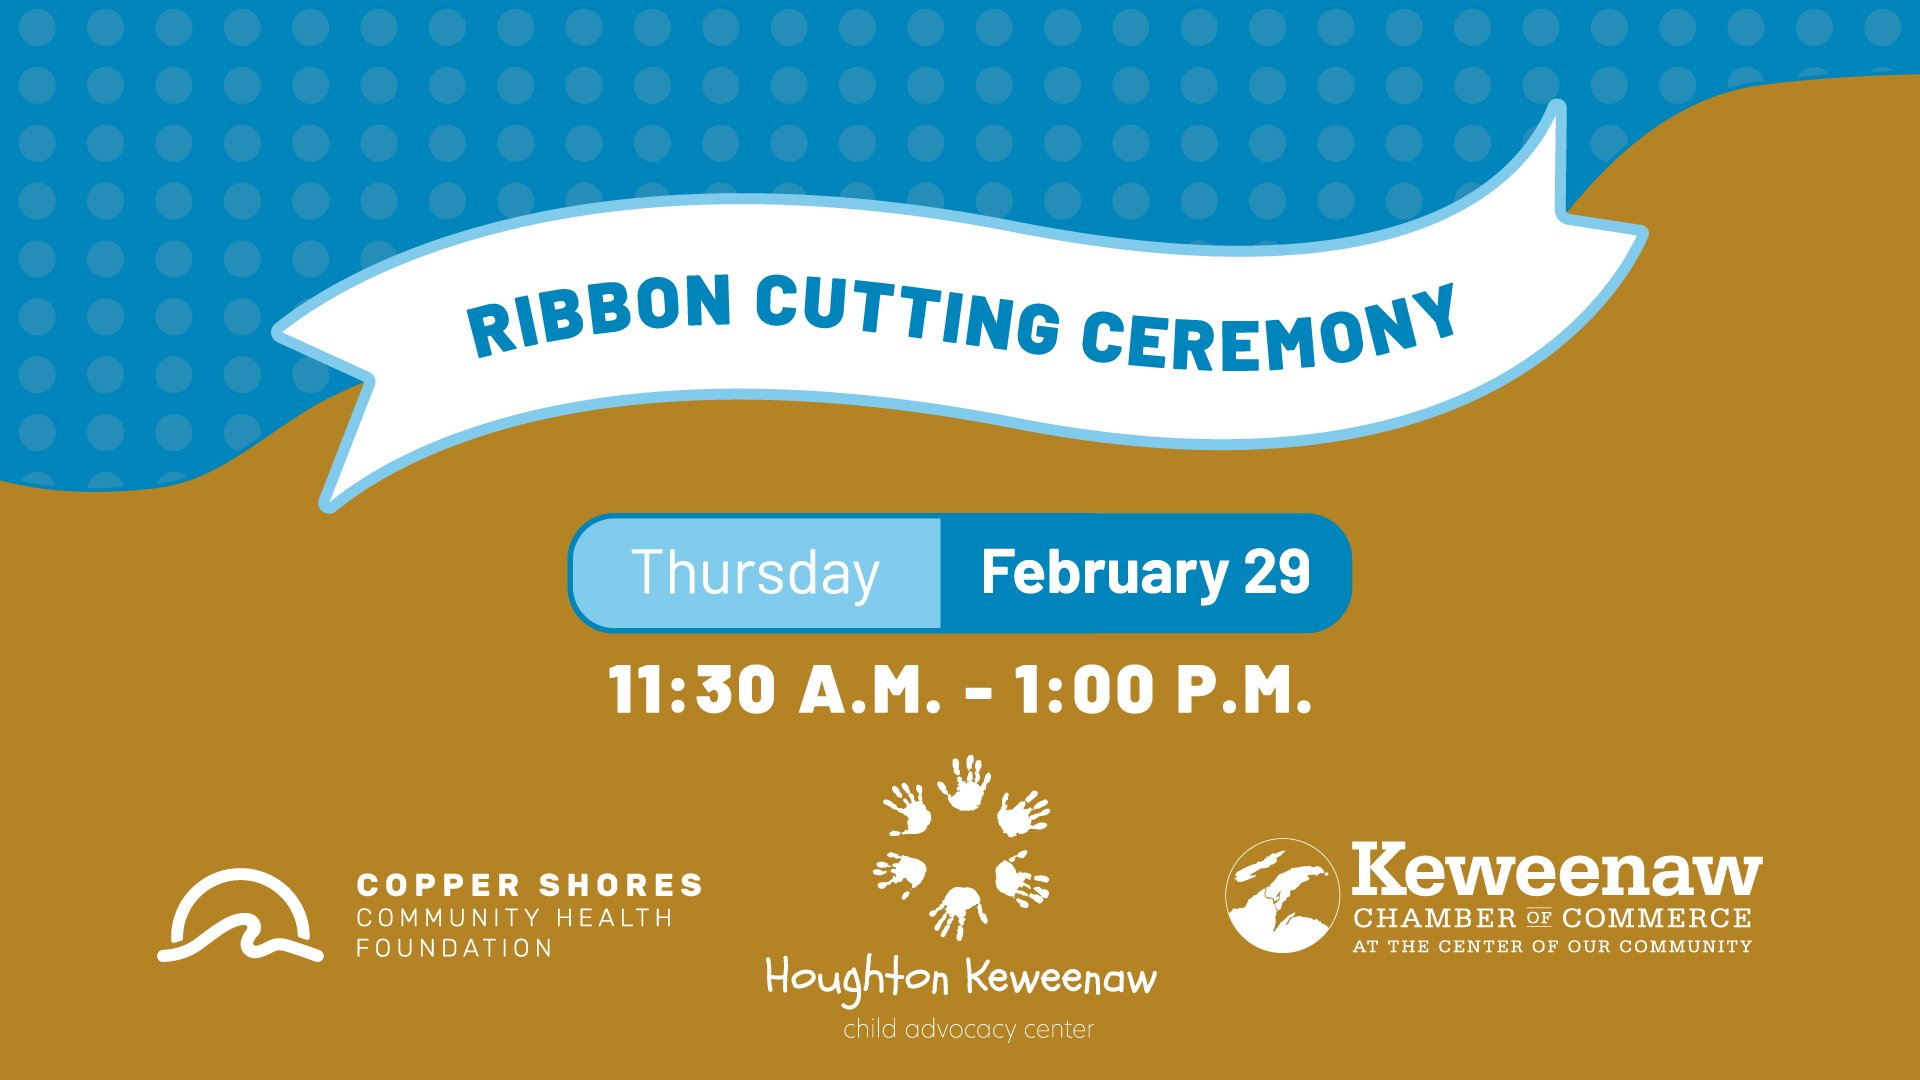 Ribbon-Cutting Ceremony - Featured Image